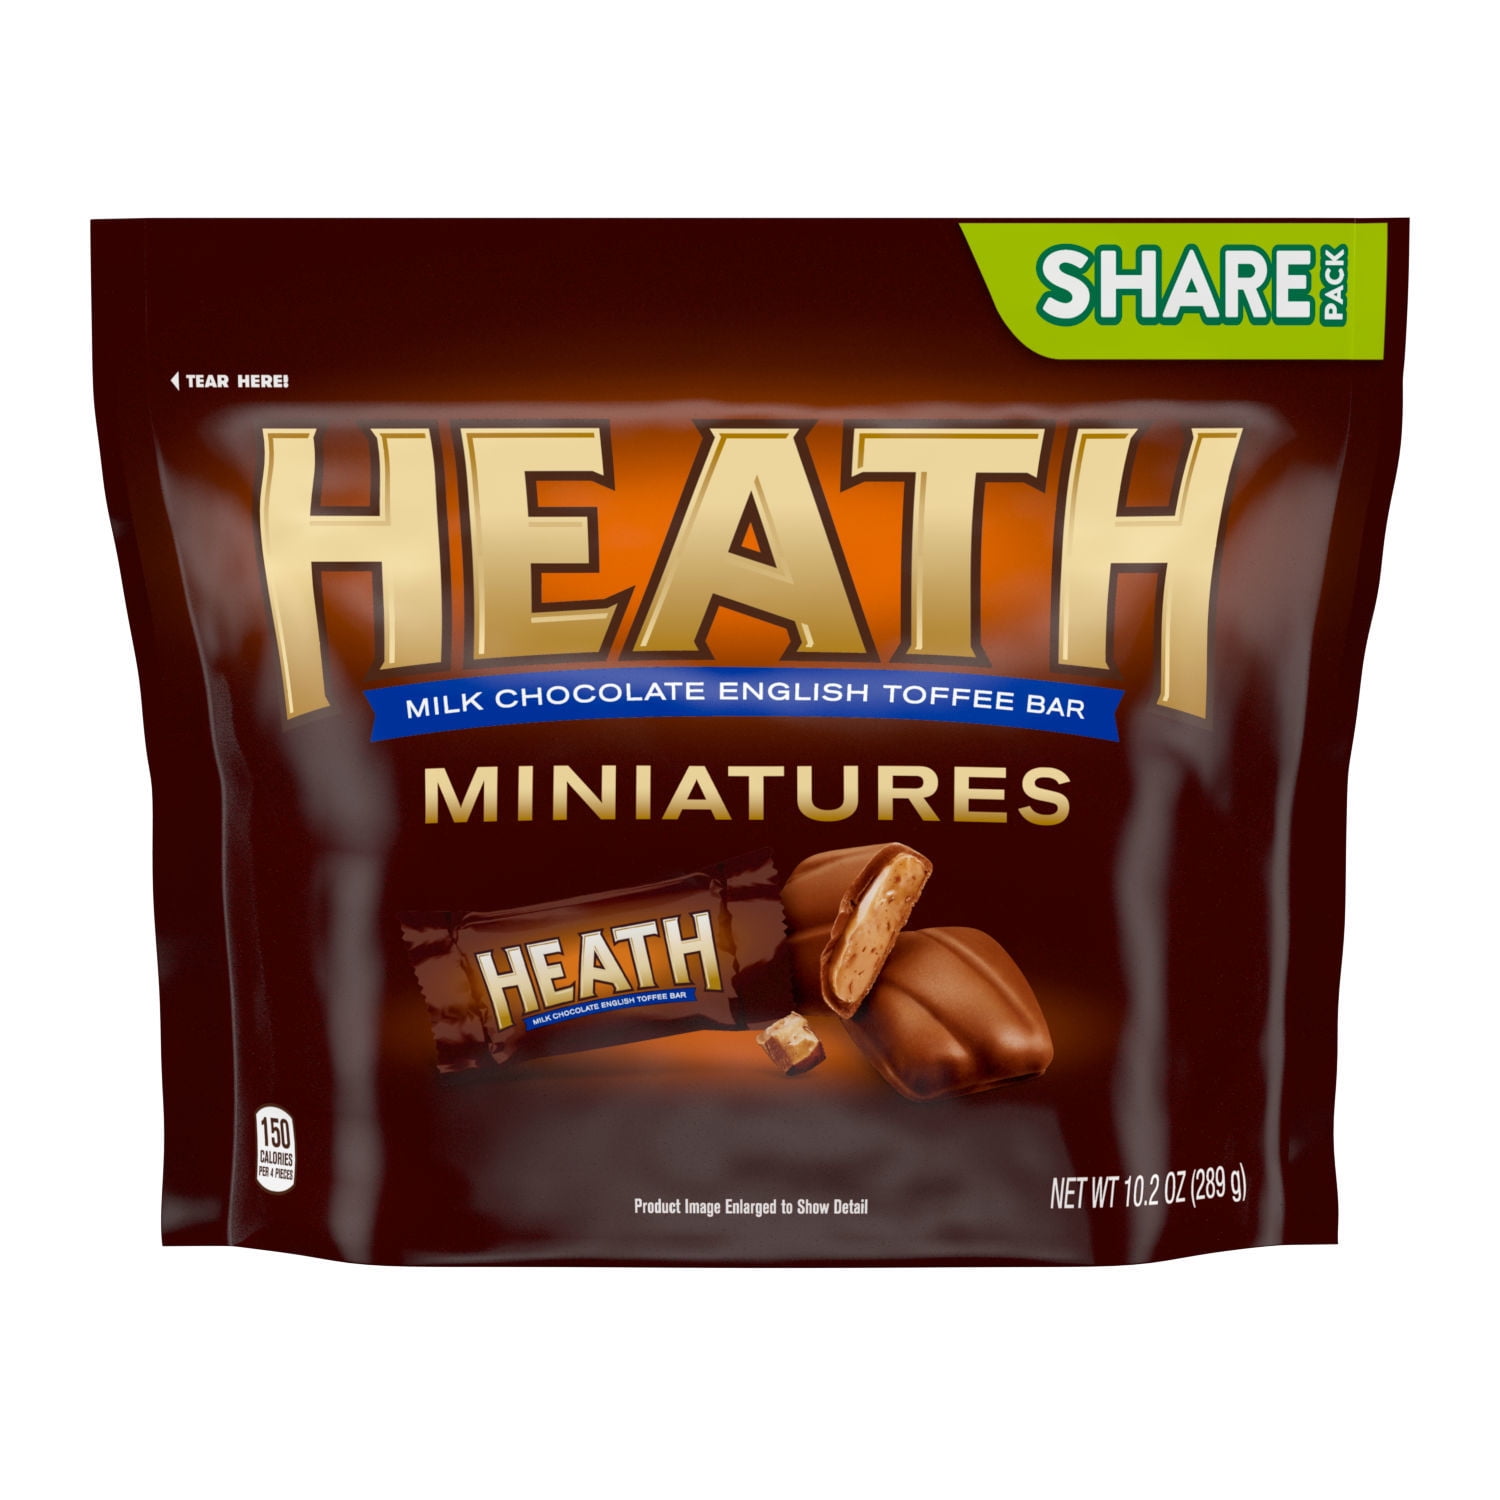 HEATH Miniatures Milk Chocolate English Toffee Snack Size, Individually Wrapped, Gluten Free Candy Bars Share Pack, 10.2 oz